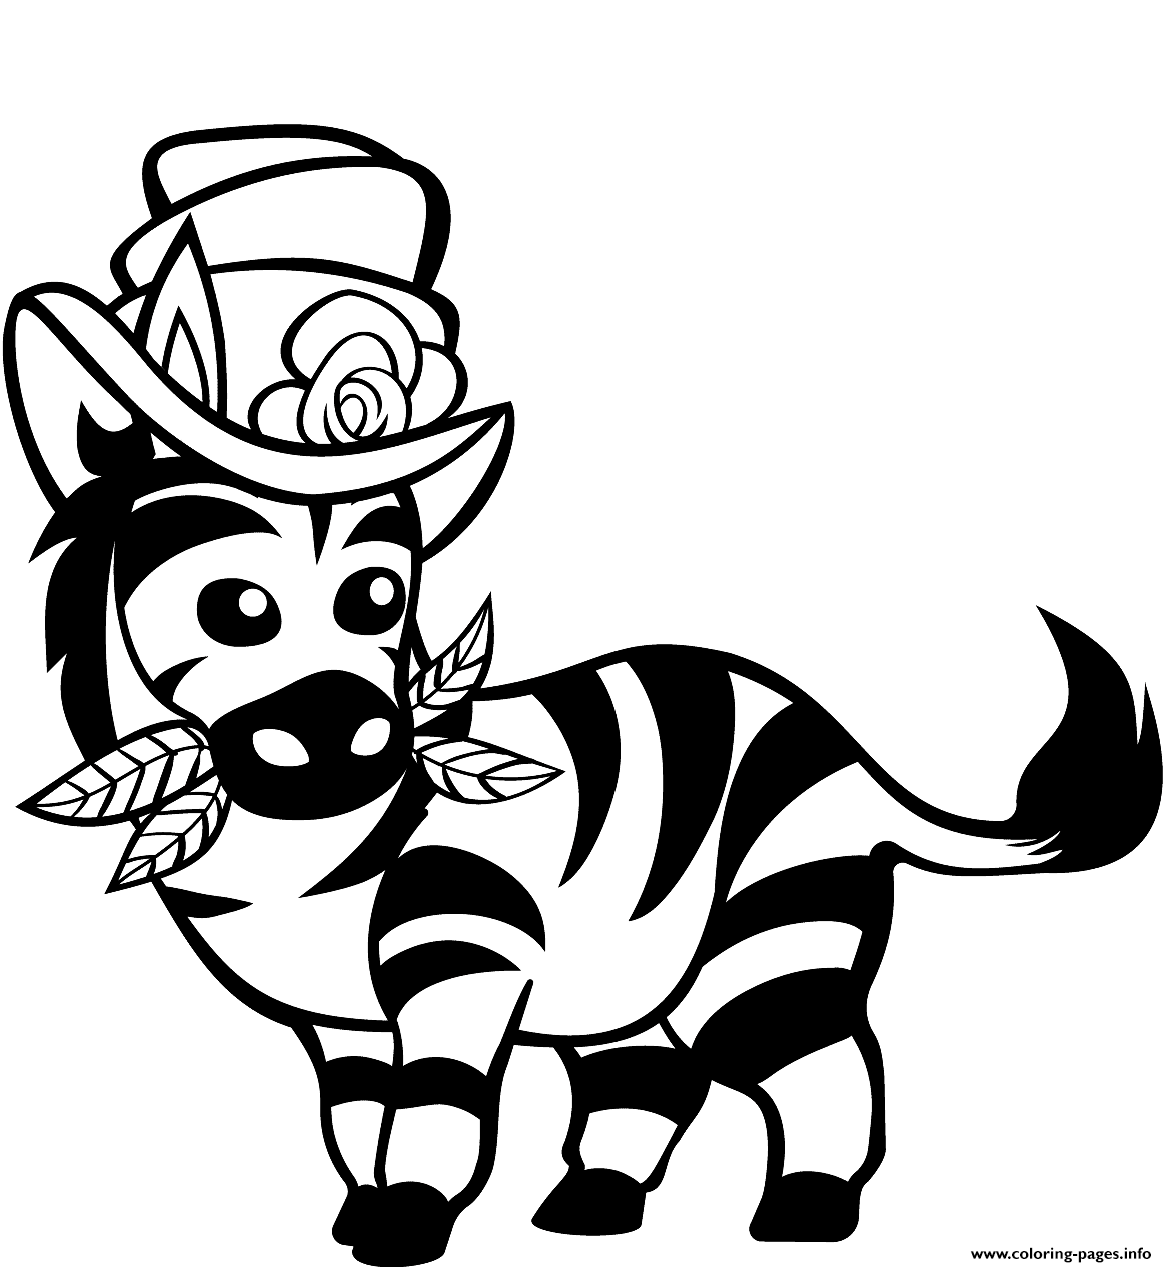 Cute Zebra With Top Hat coloring